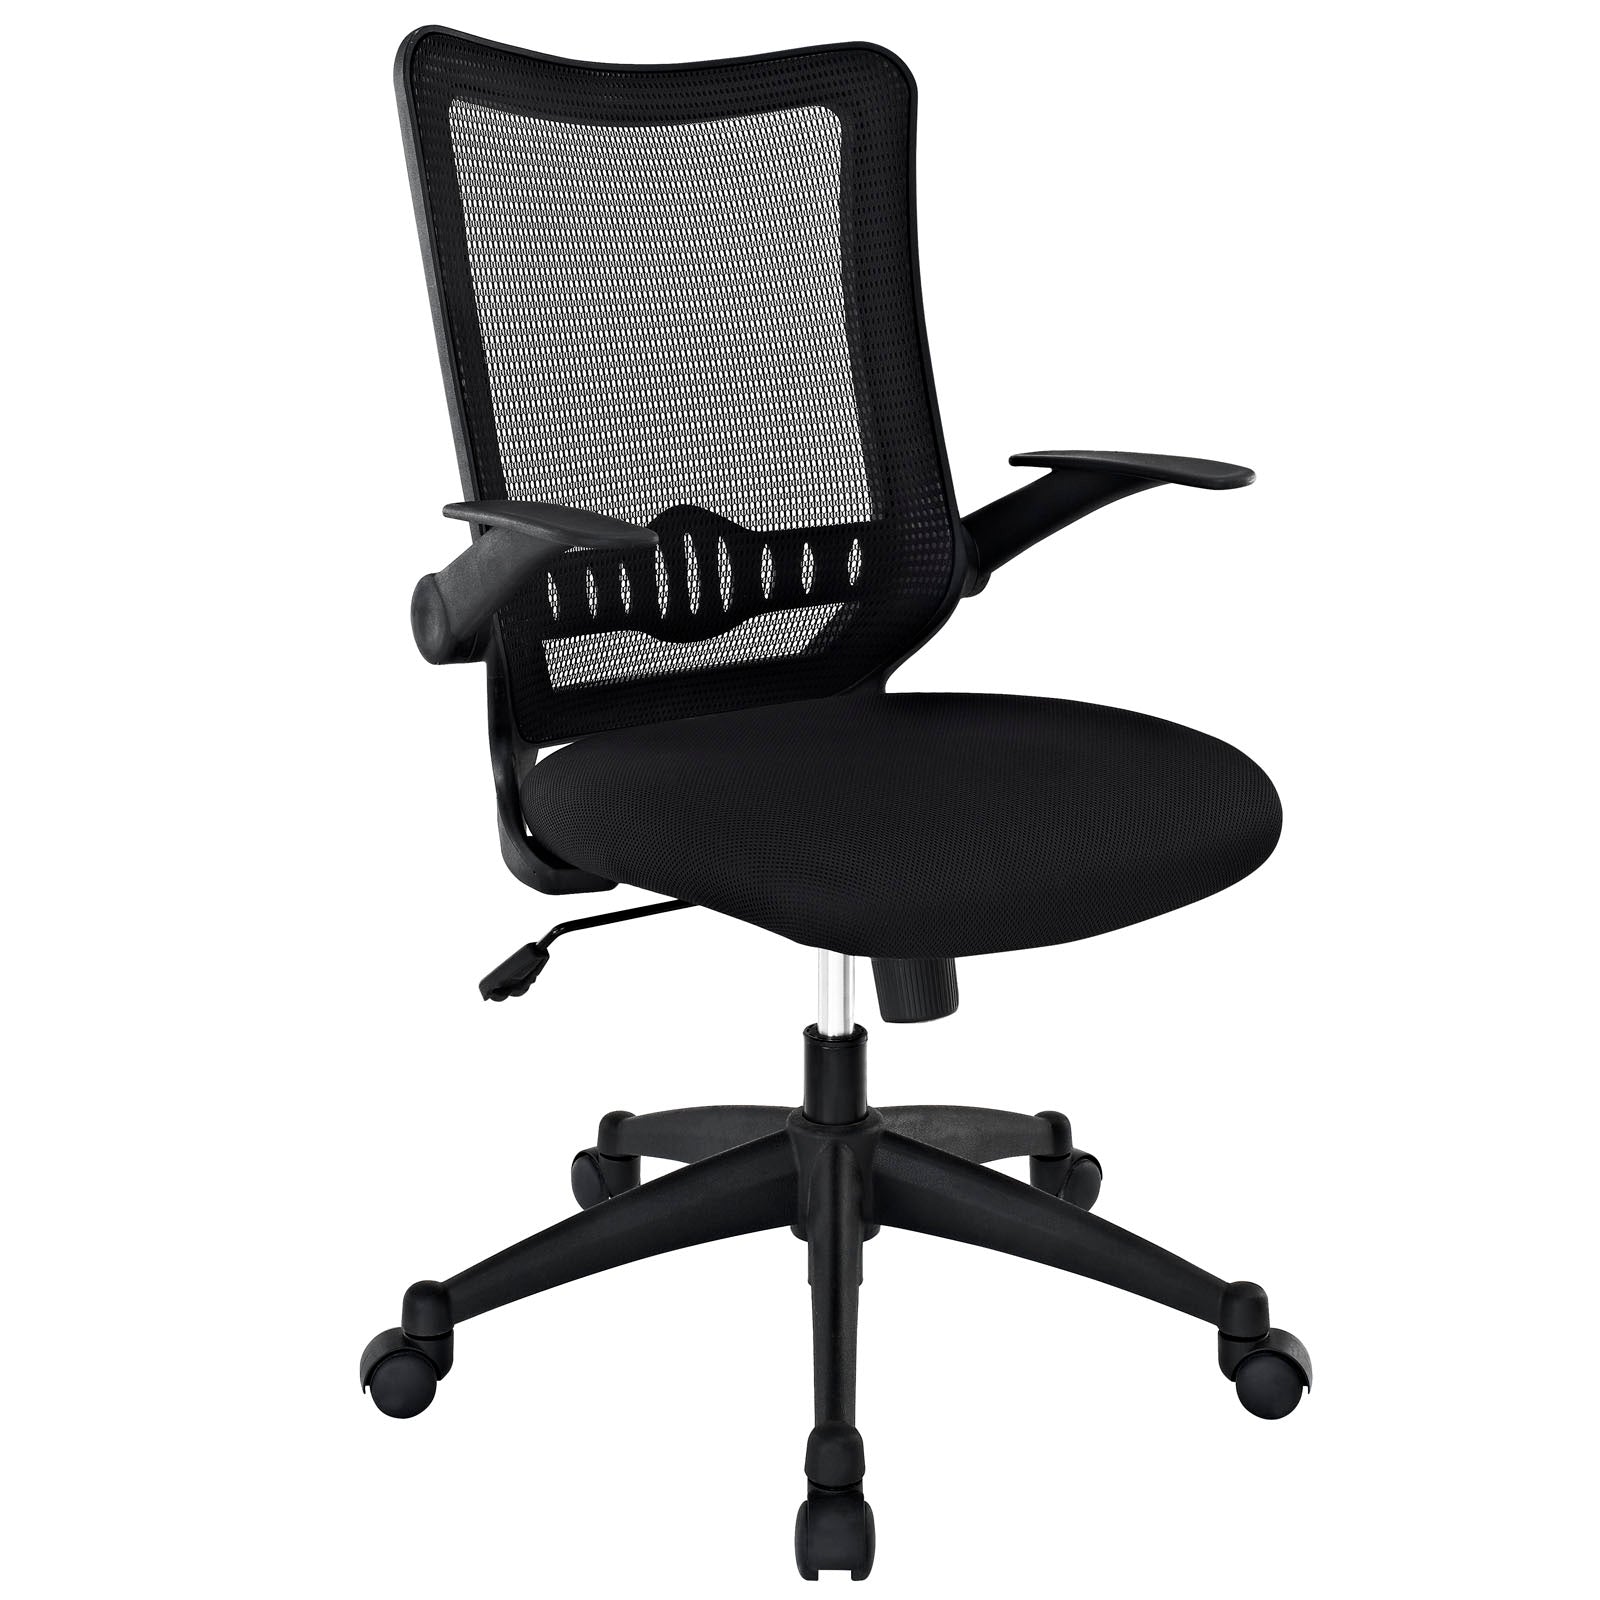 Shop Explorer Mid Back Mesh Office Chair with Tilt-tension at BUILDMyplace